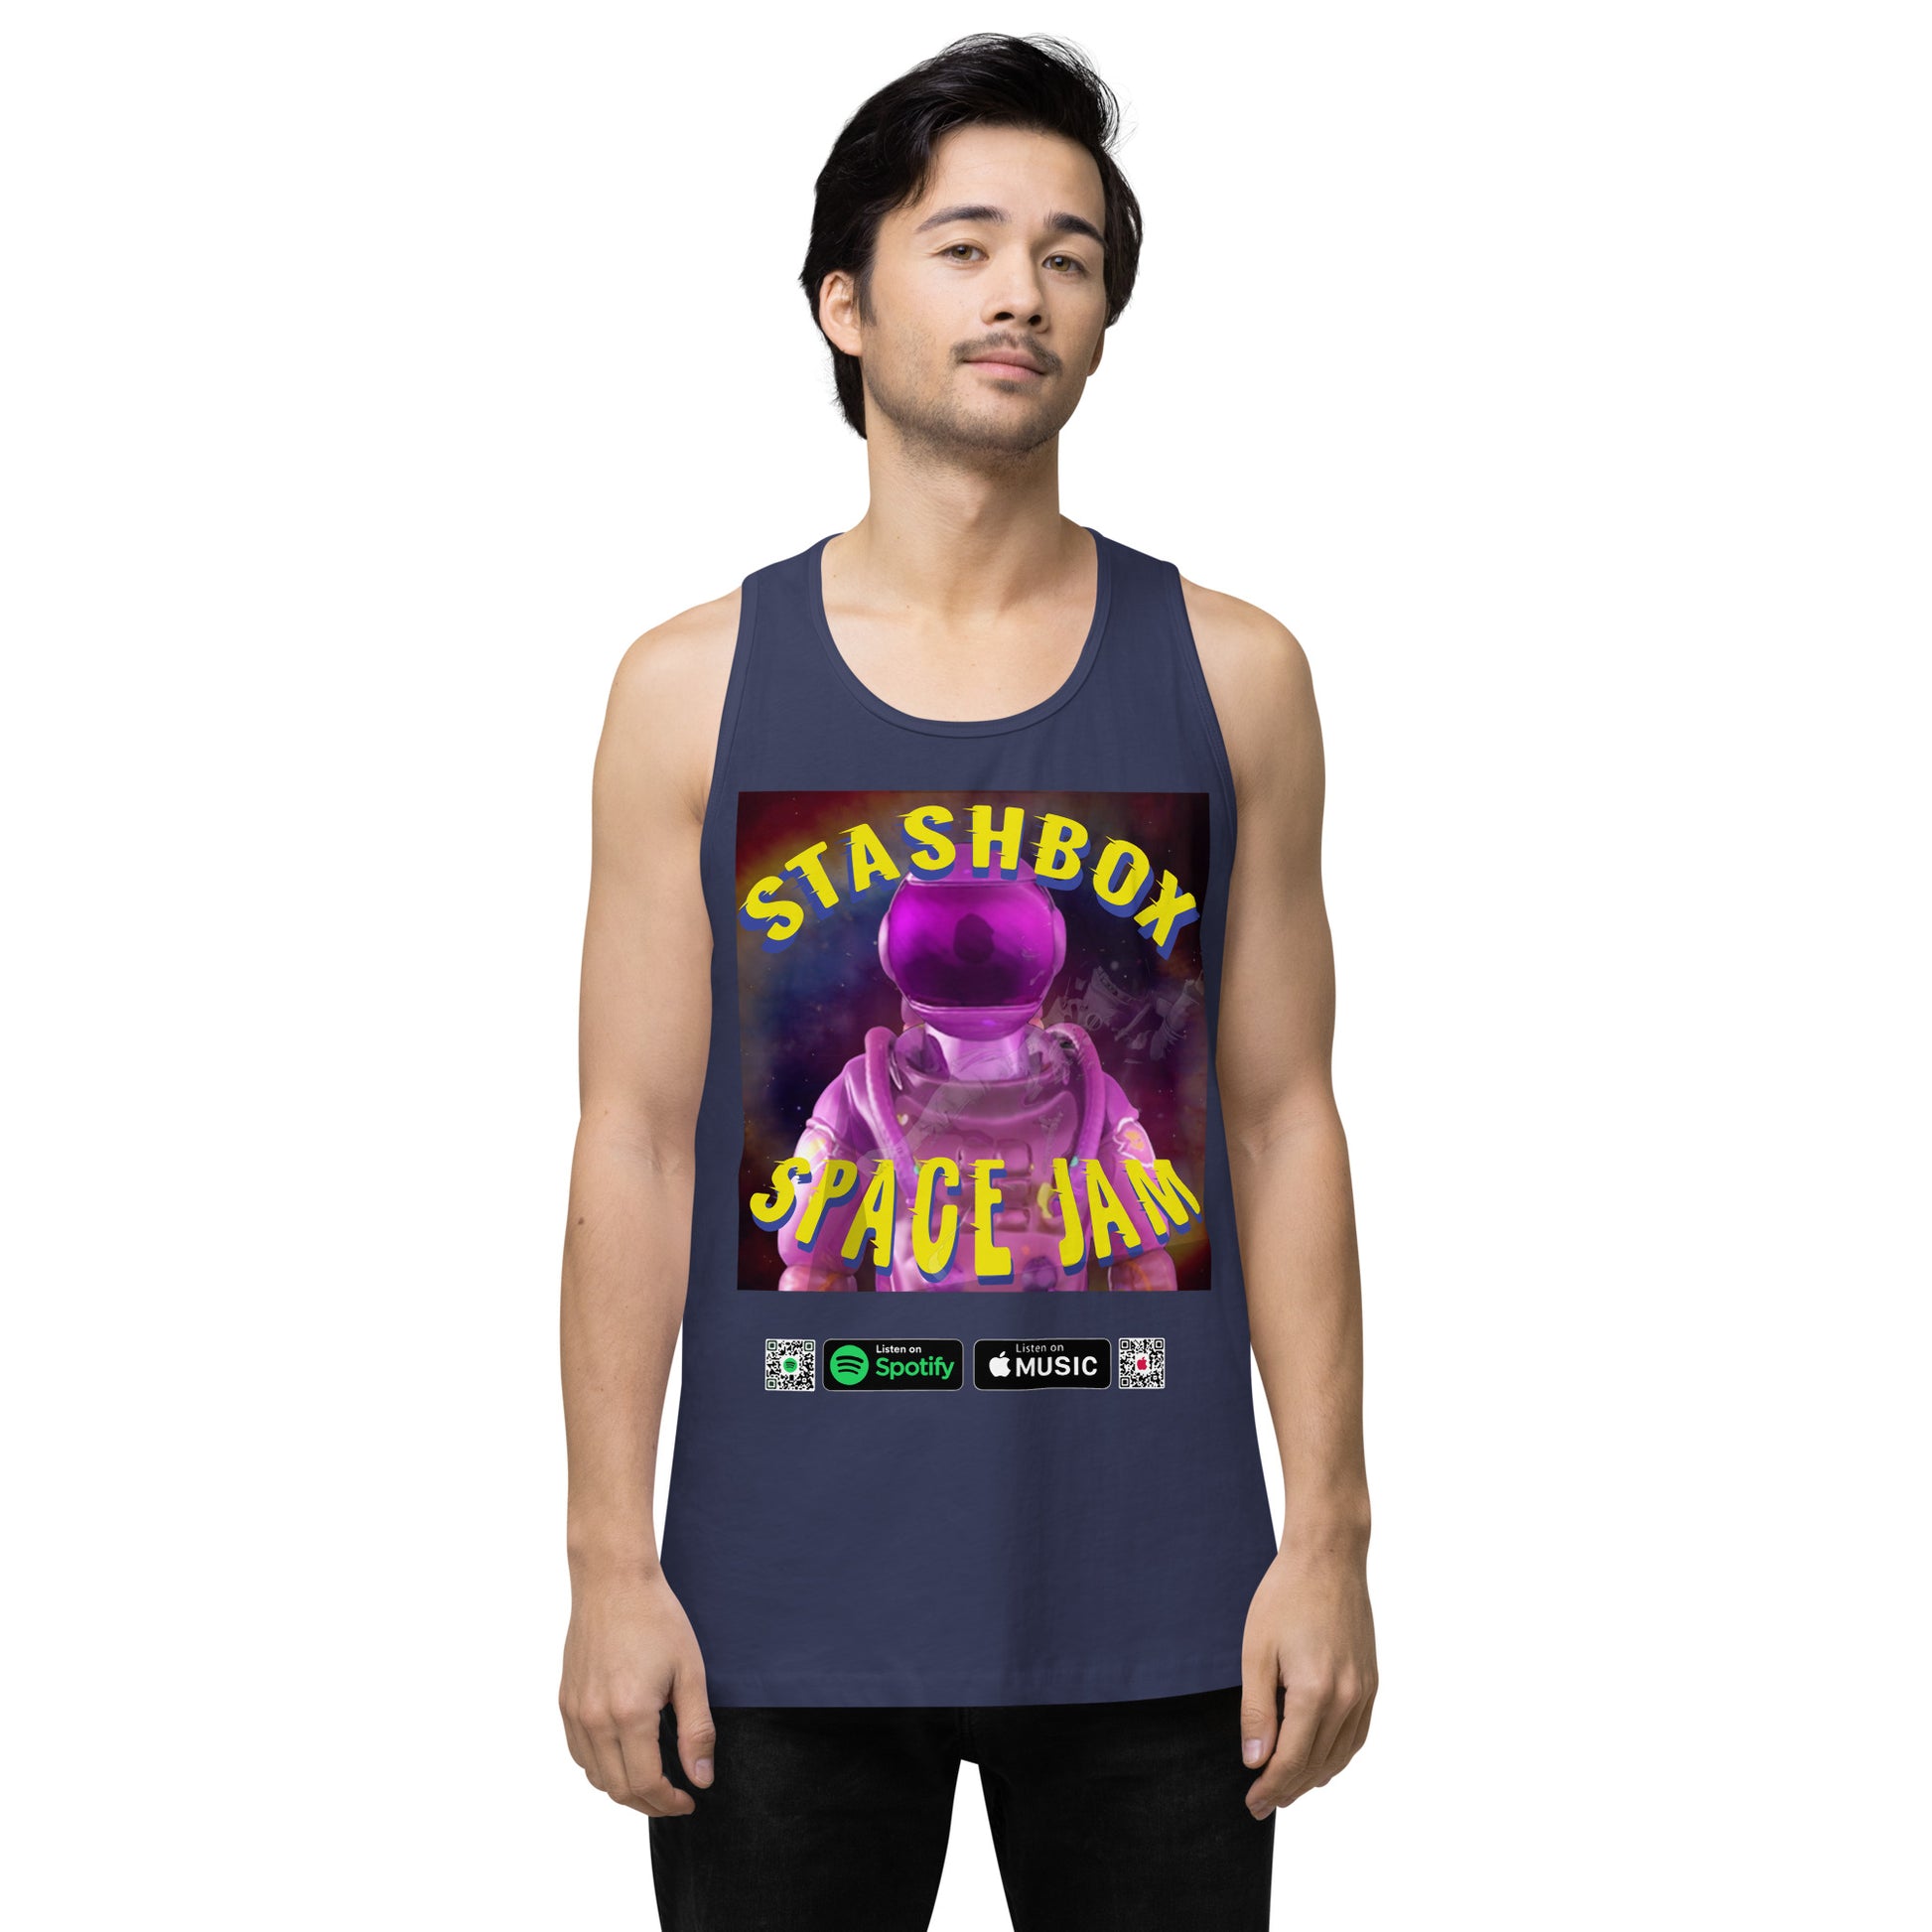 Fashion Beyond Earth: Space Jam - Stashbox Men’s Premium Tank Top, Design #005. Step into intergalactic fashion with this premium tank. A fusion of cosmic art and comfort, perfect for those who dream beyond the stars. #StashboxGalacticArt #SpaceEnthusiast #AstronomyFashion